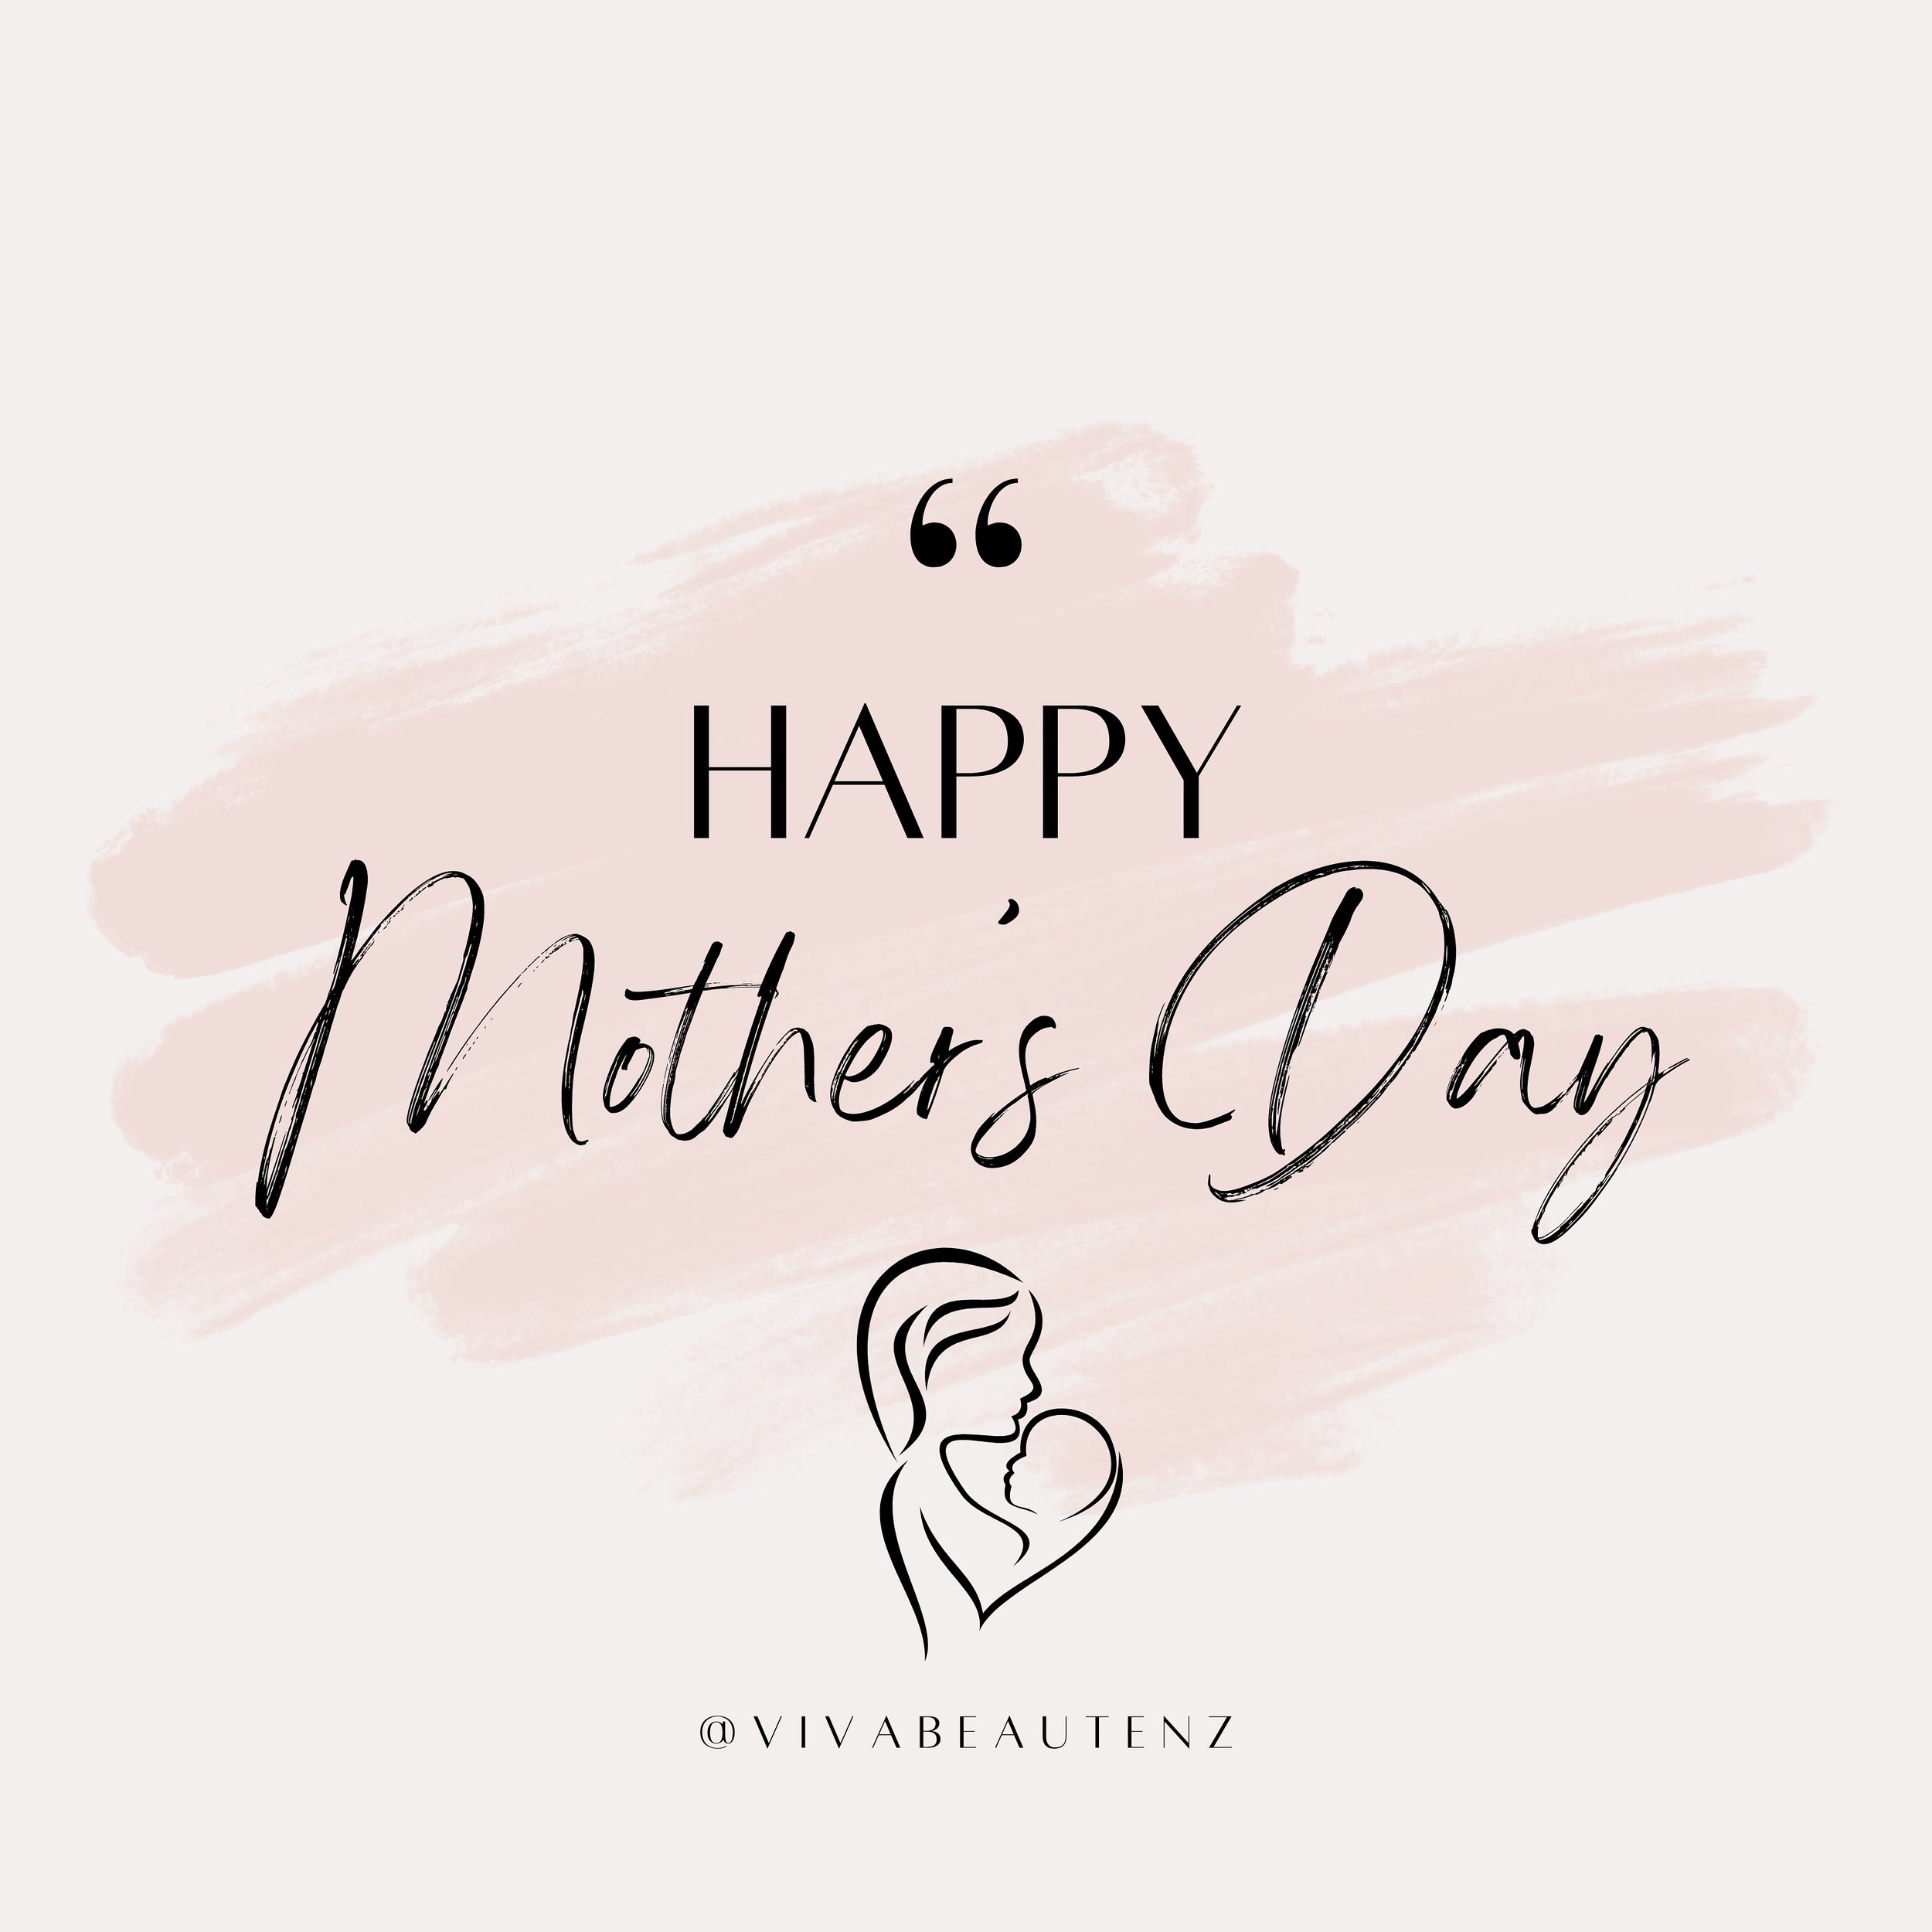 Happy Mother&rsquo;s Day to all the mummas, grandmamas, and every incredible woman who nurtures, guides, and loves unconditionally. Today, let&rsquo;s celebrate the powerful bonds of motherhood and cherish the special moments with our loved ones. 🌷?